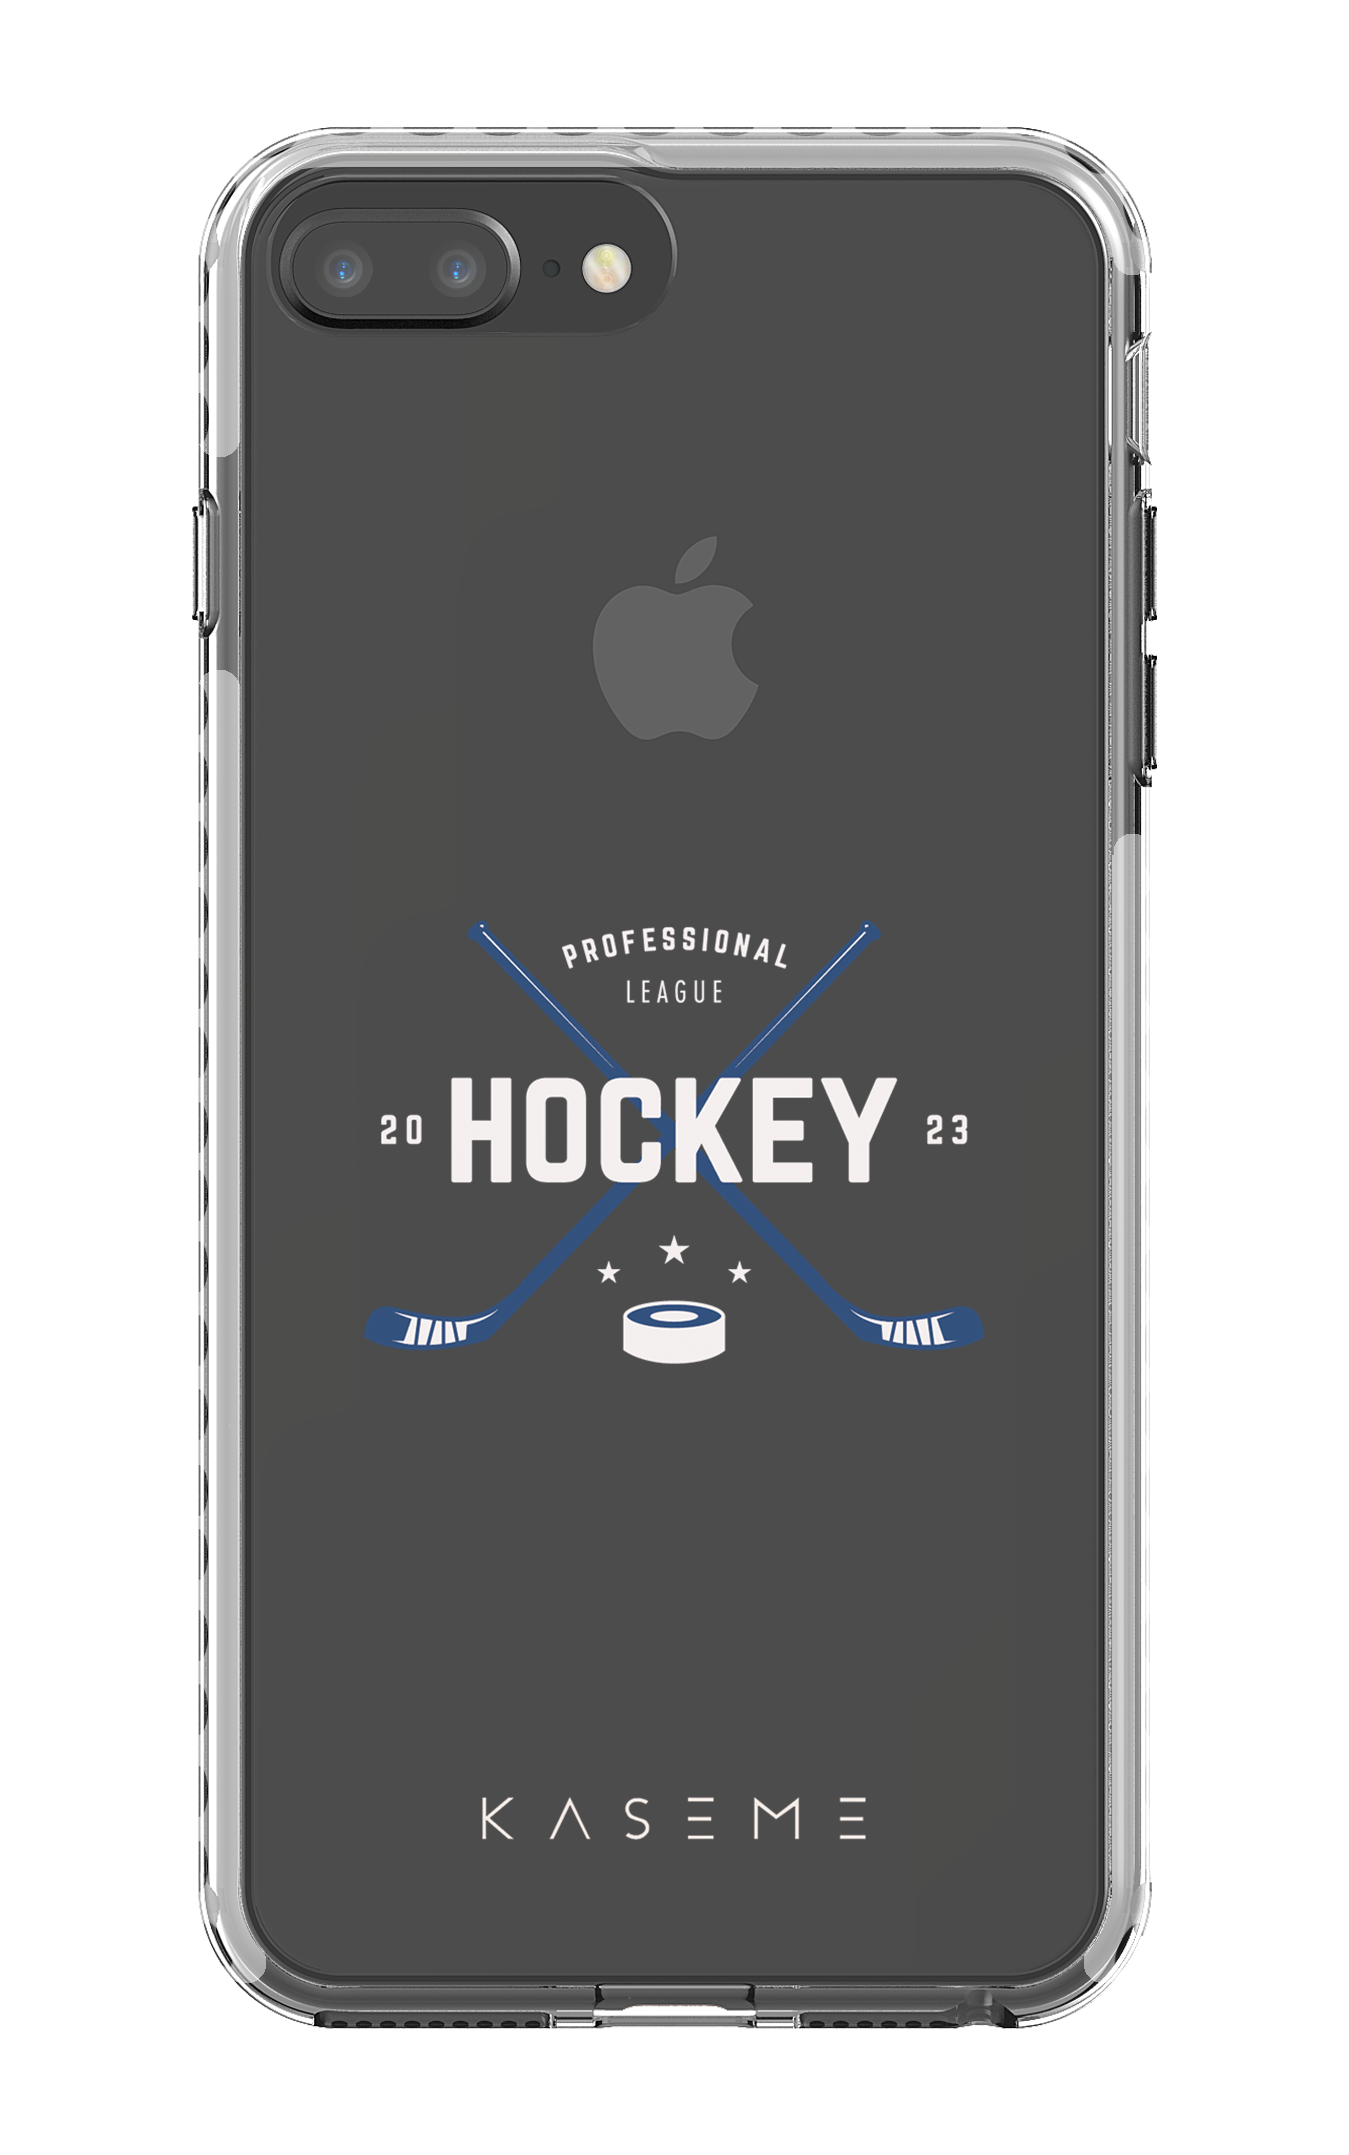 Playoffs clear case - iPhone 7/8 Plus